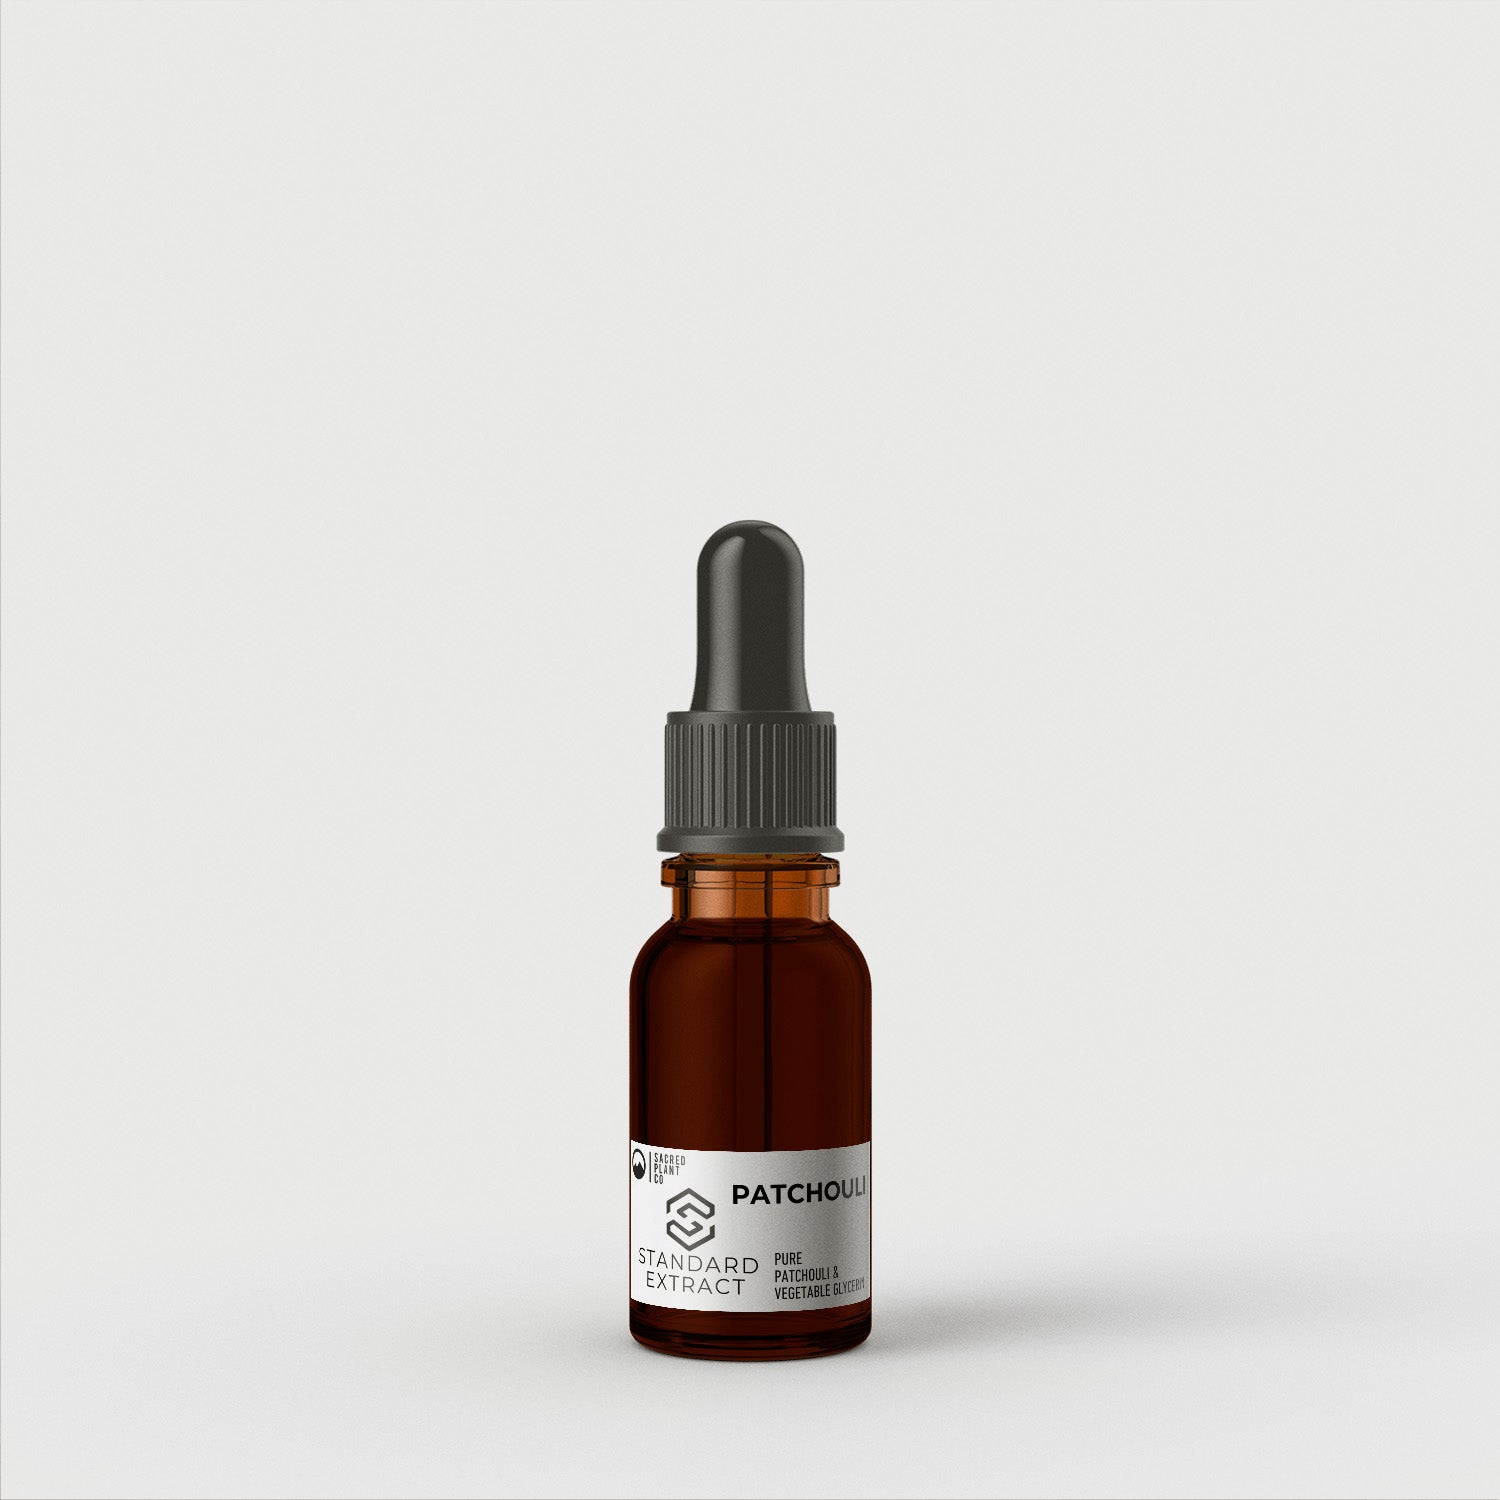 Simple yet sophisticated amber bottle with dropper, labeled Sacred Plant Co Standard Patchouli Extract, isolated on a white background.